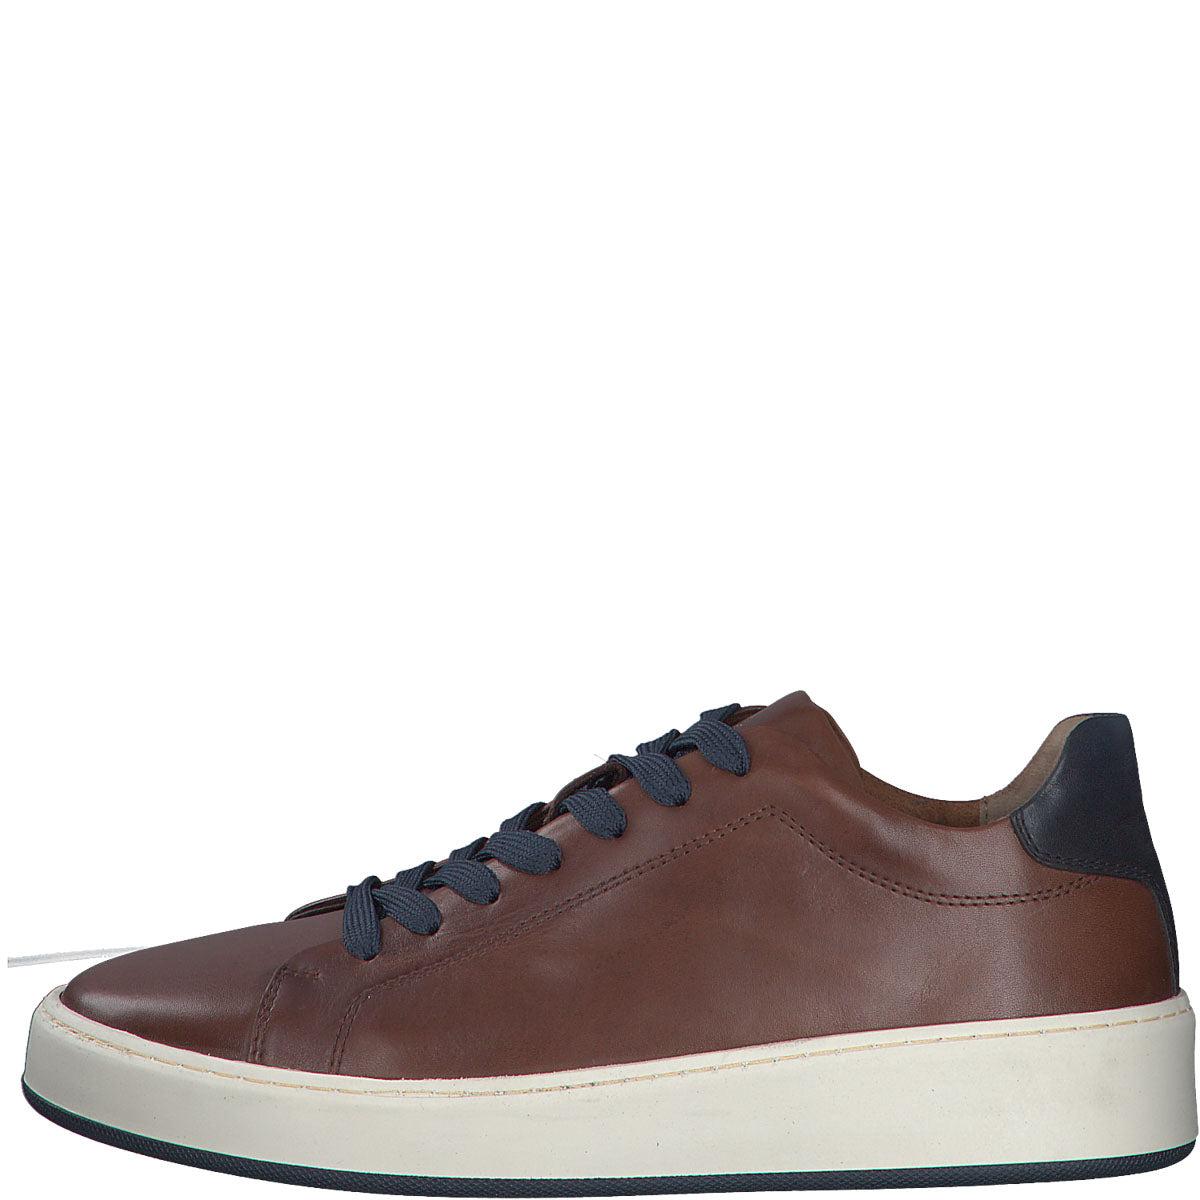 Men's Brown Leather Runner Style Trainers with Blue Accents